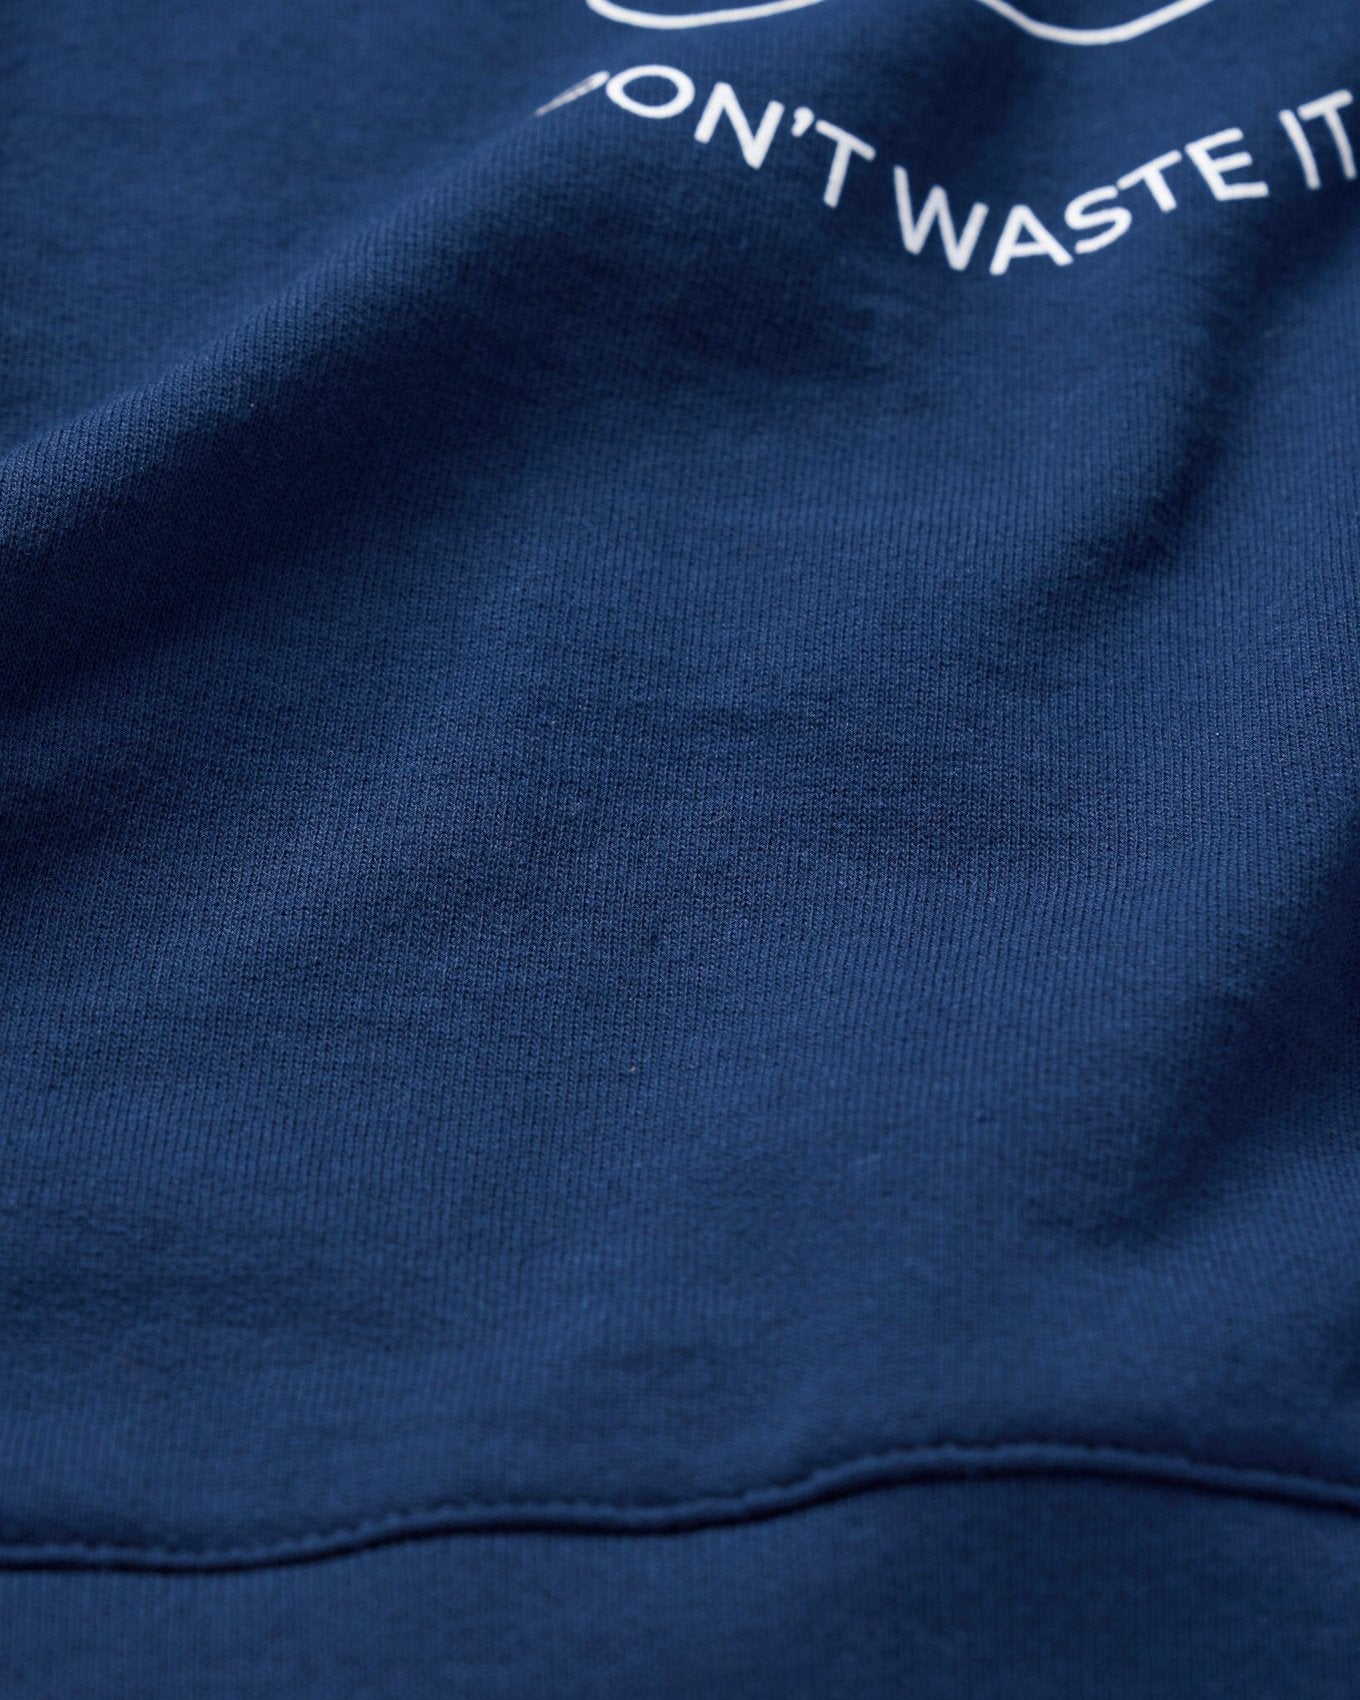 ReApparel Water Crew Neck . in color Navy Blue and shape long sleeve